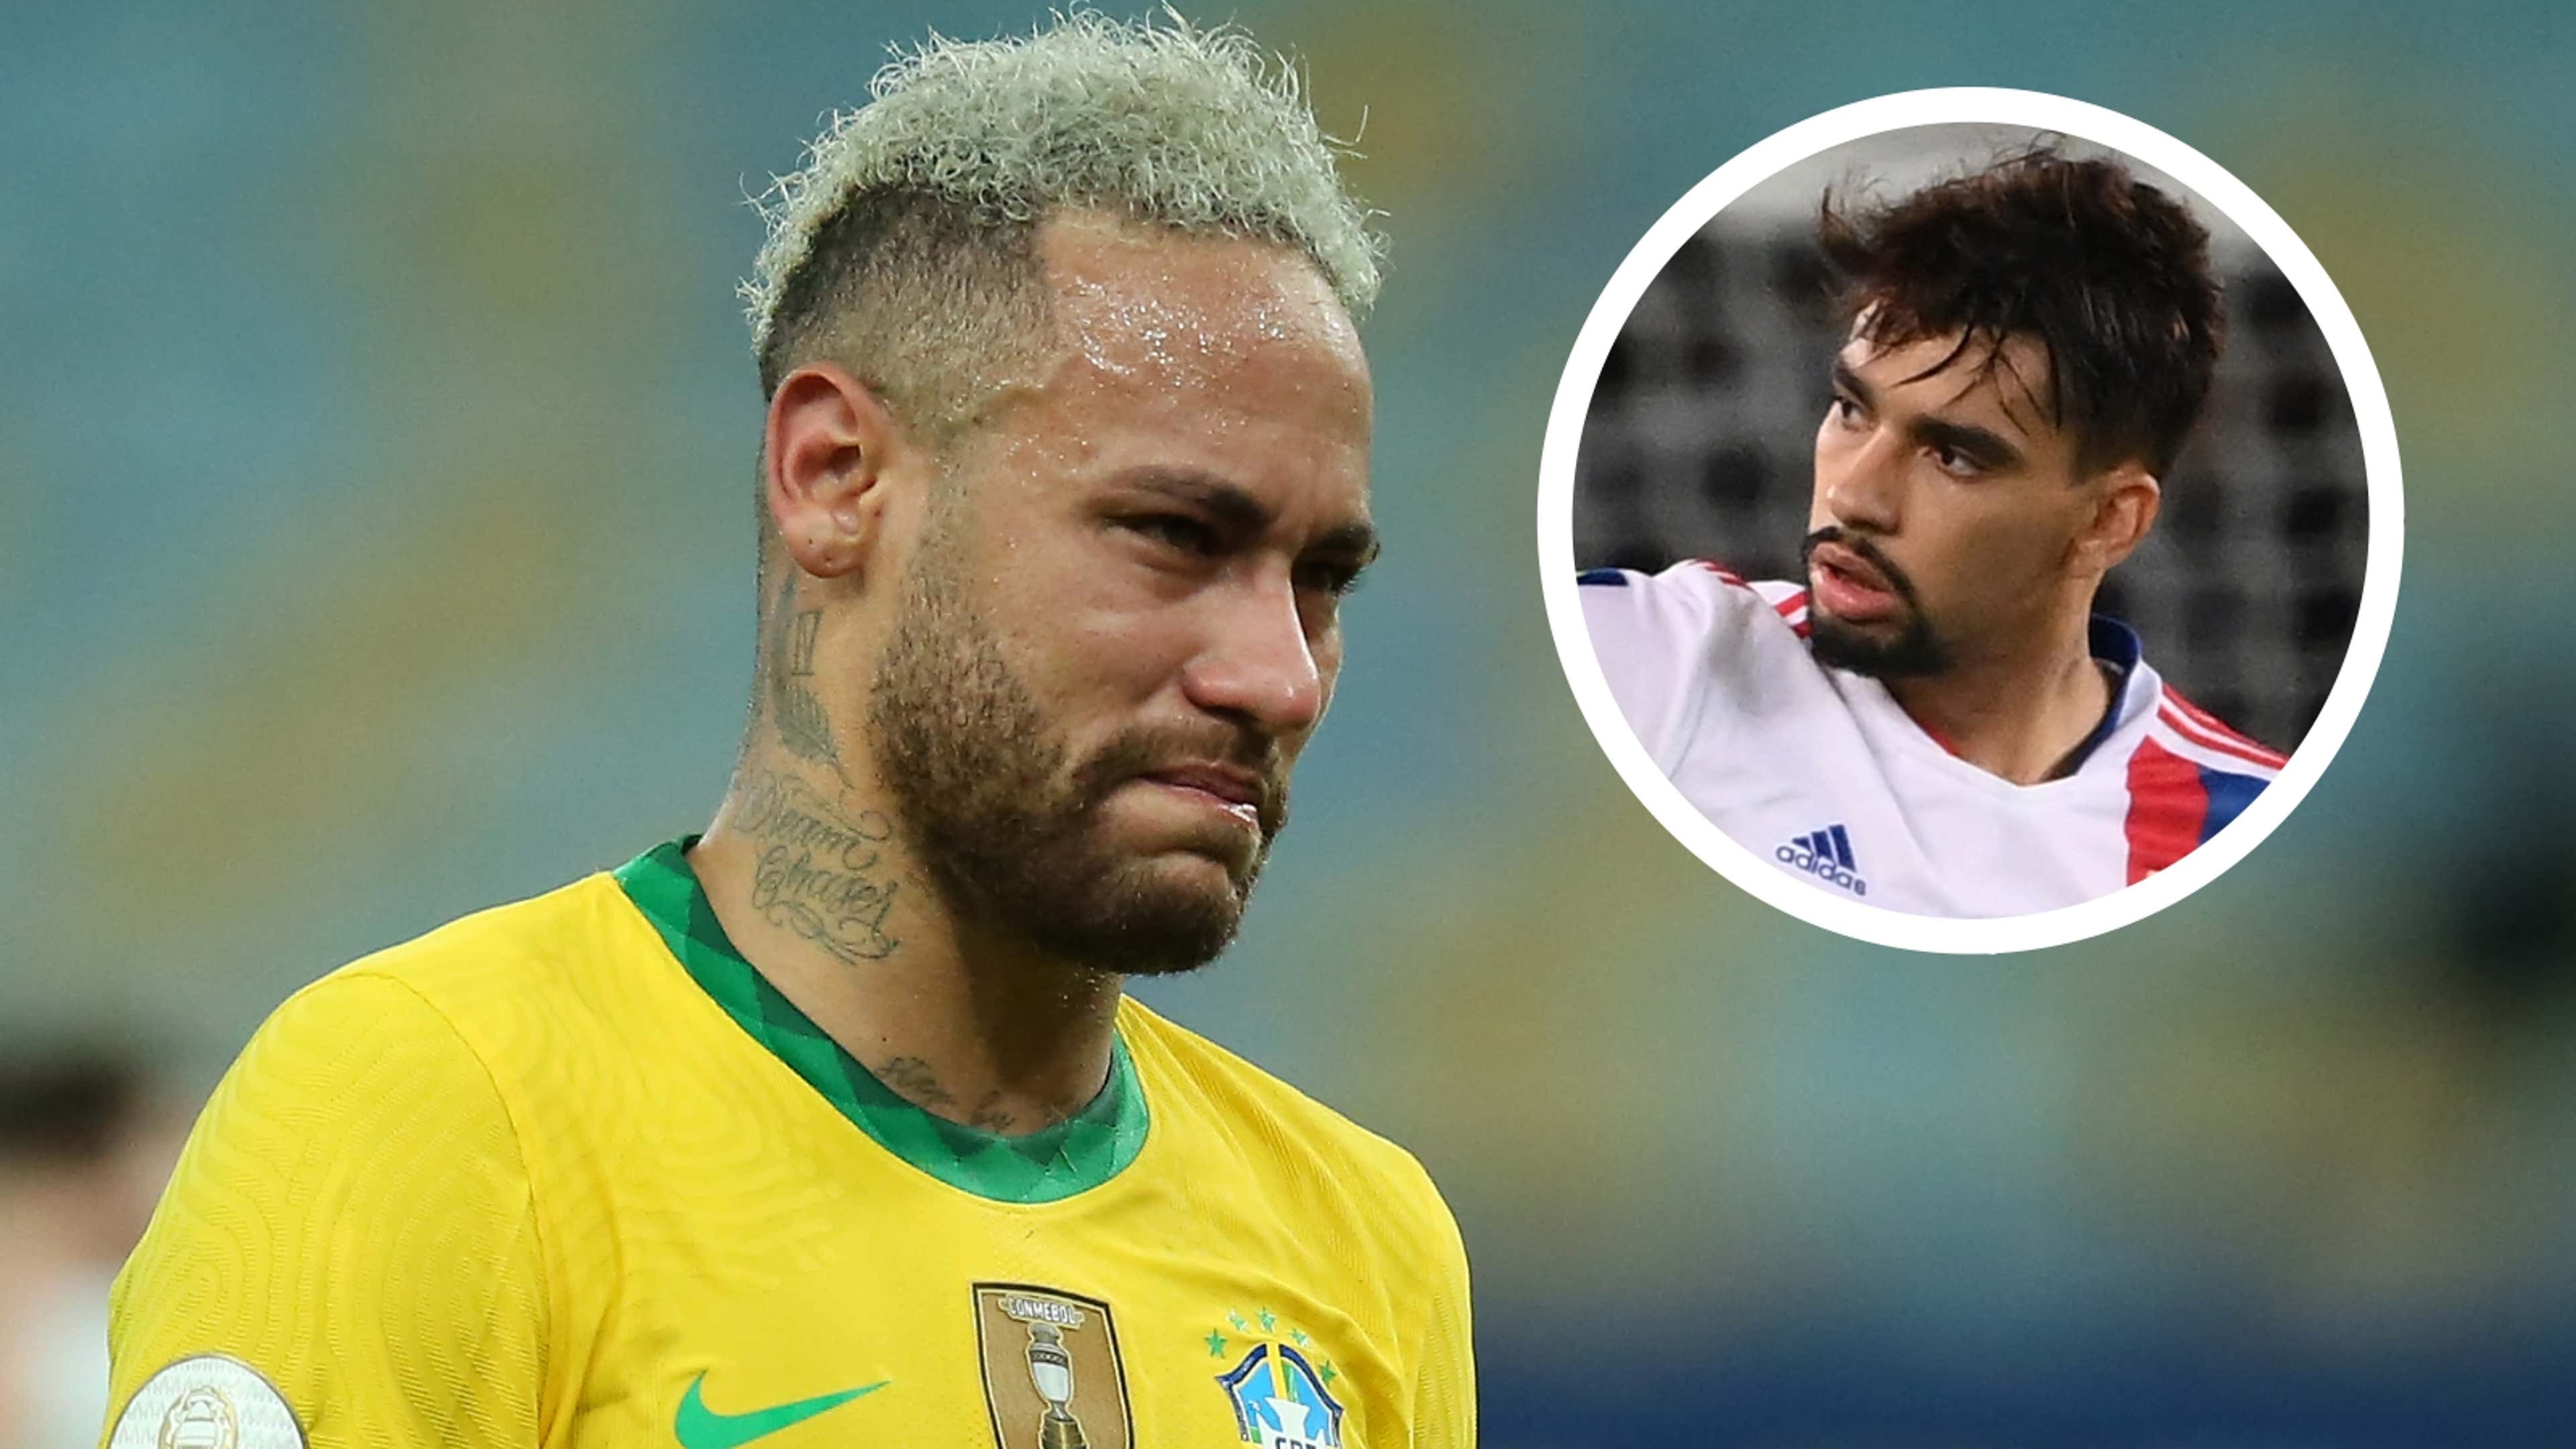 Joga Bonito is over' - Neymar reacts to rainbow flick booking for Brazil  team-mate Paqueta